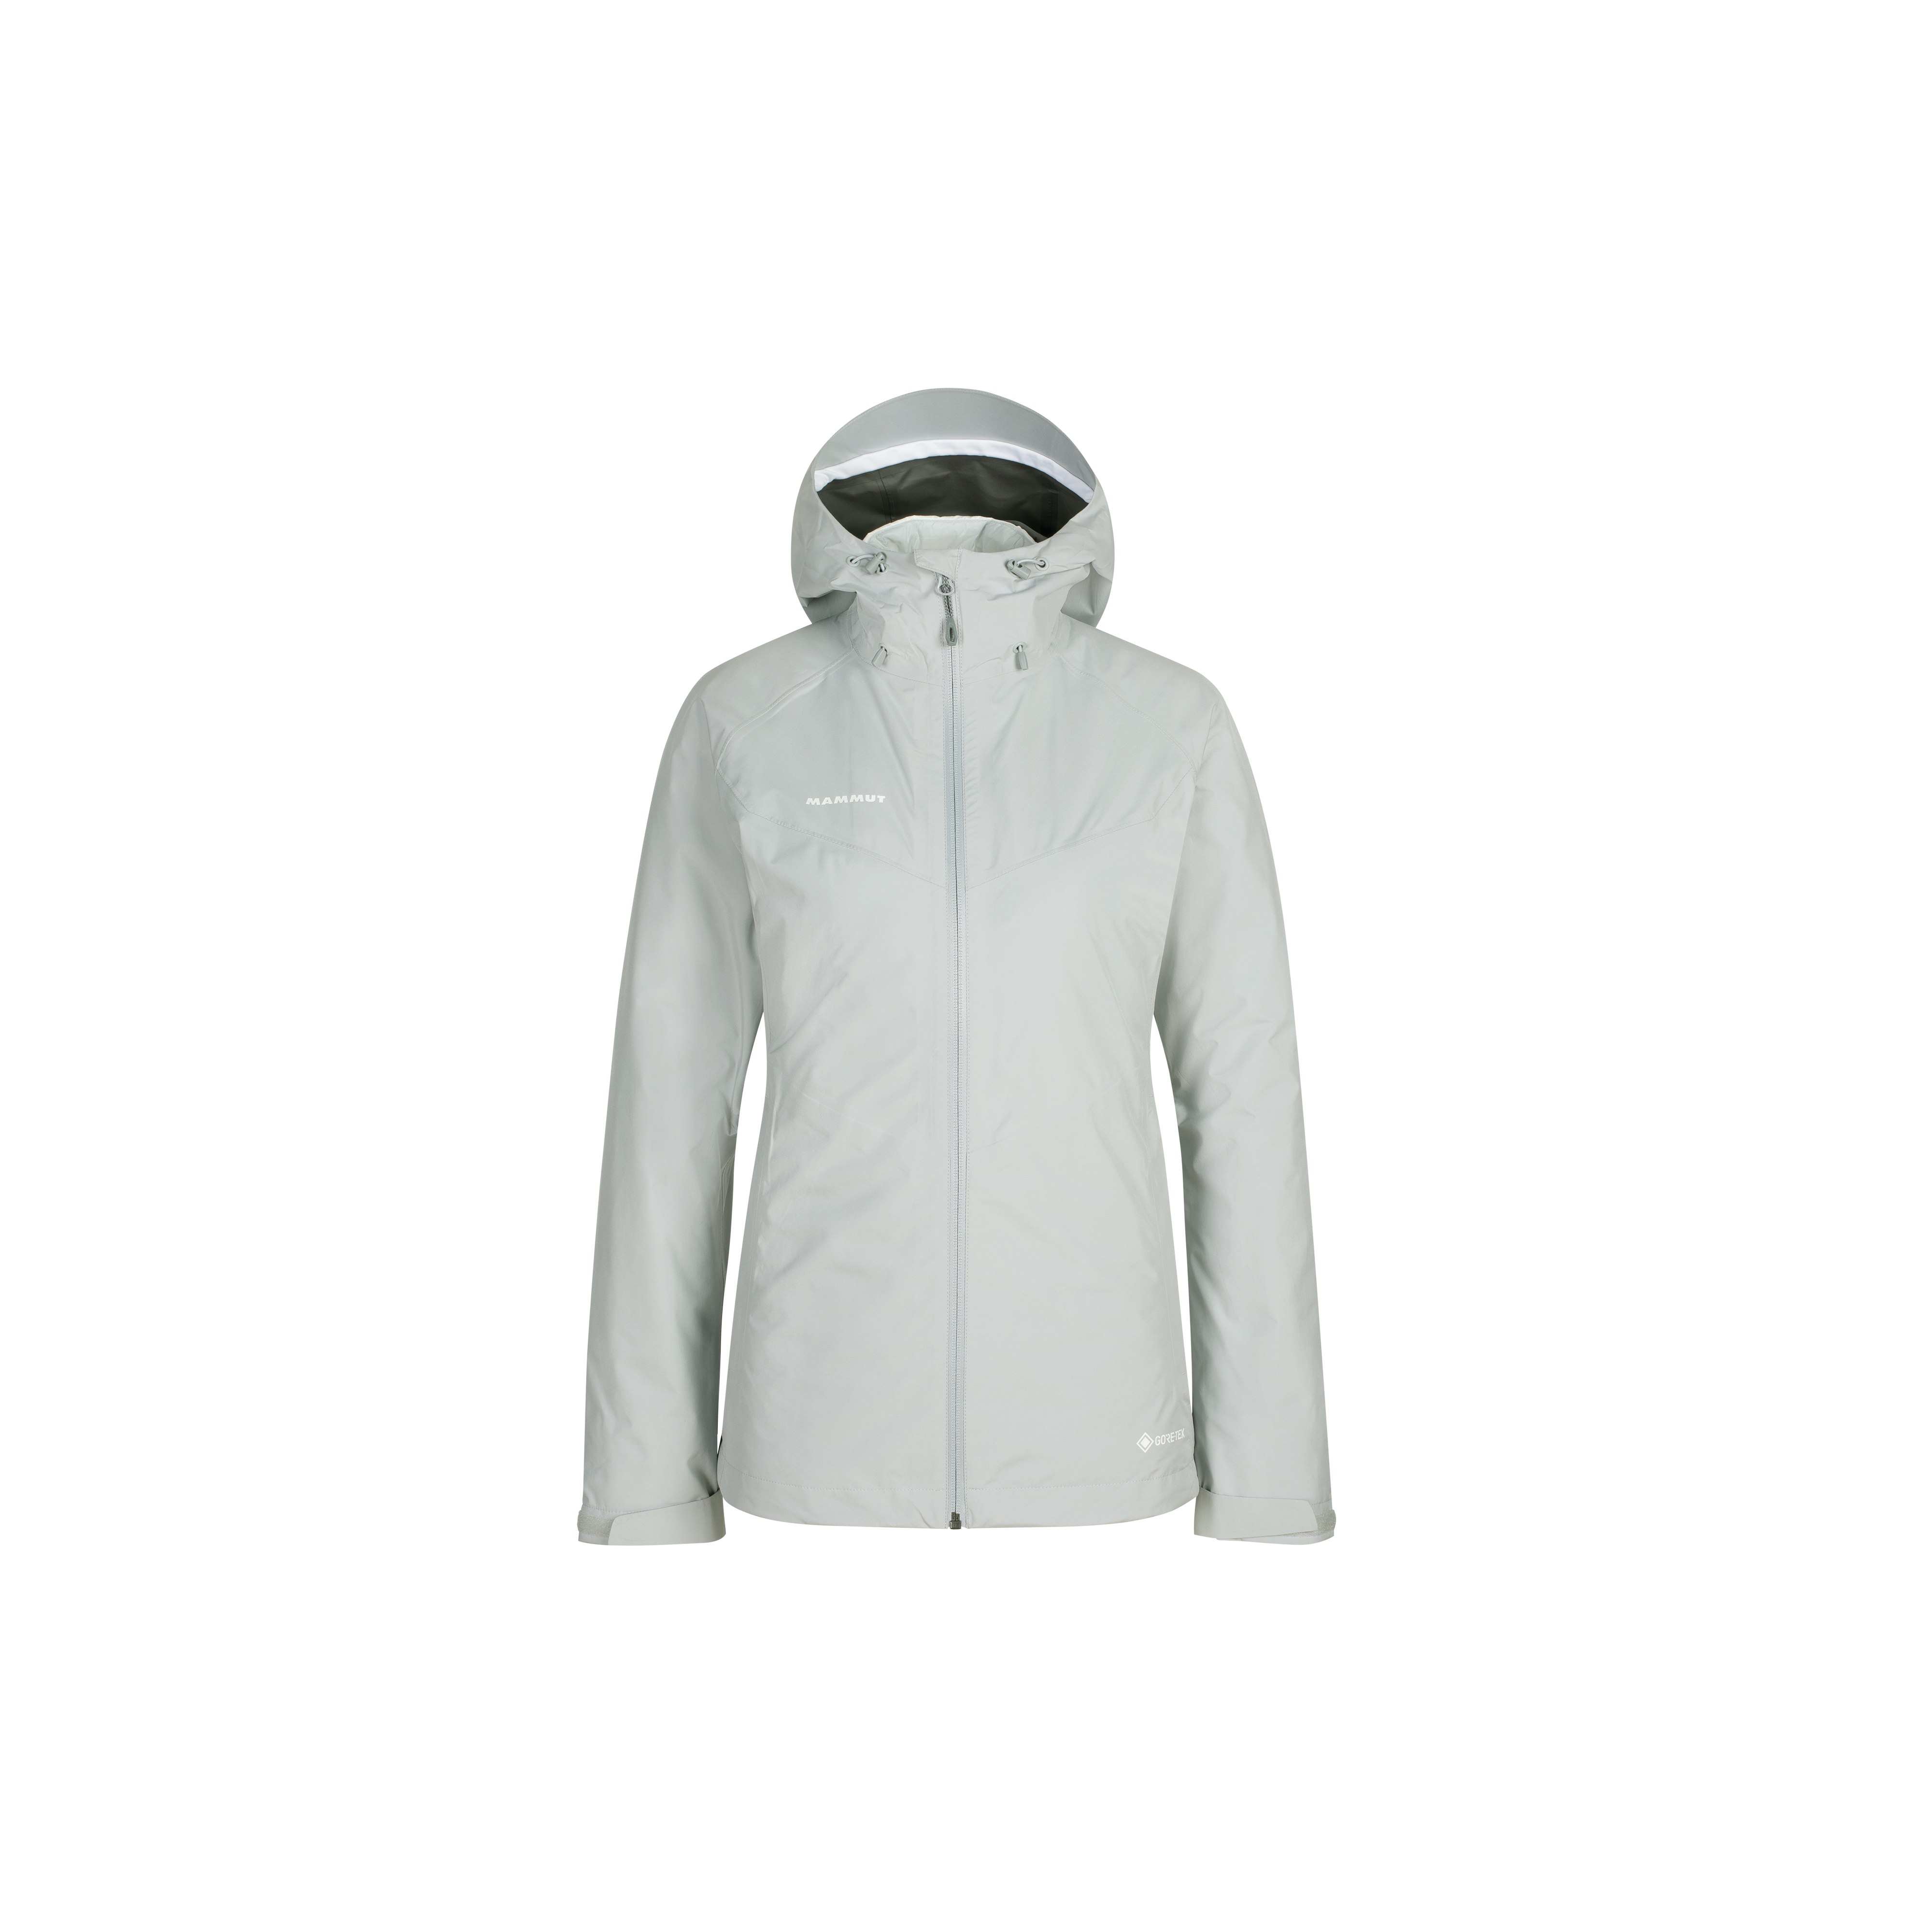 Convey 3 in 1 HS Hooded Jacket Women - highway-bright white thumbnail